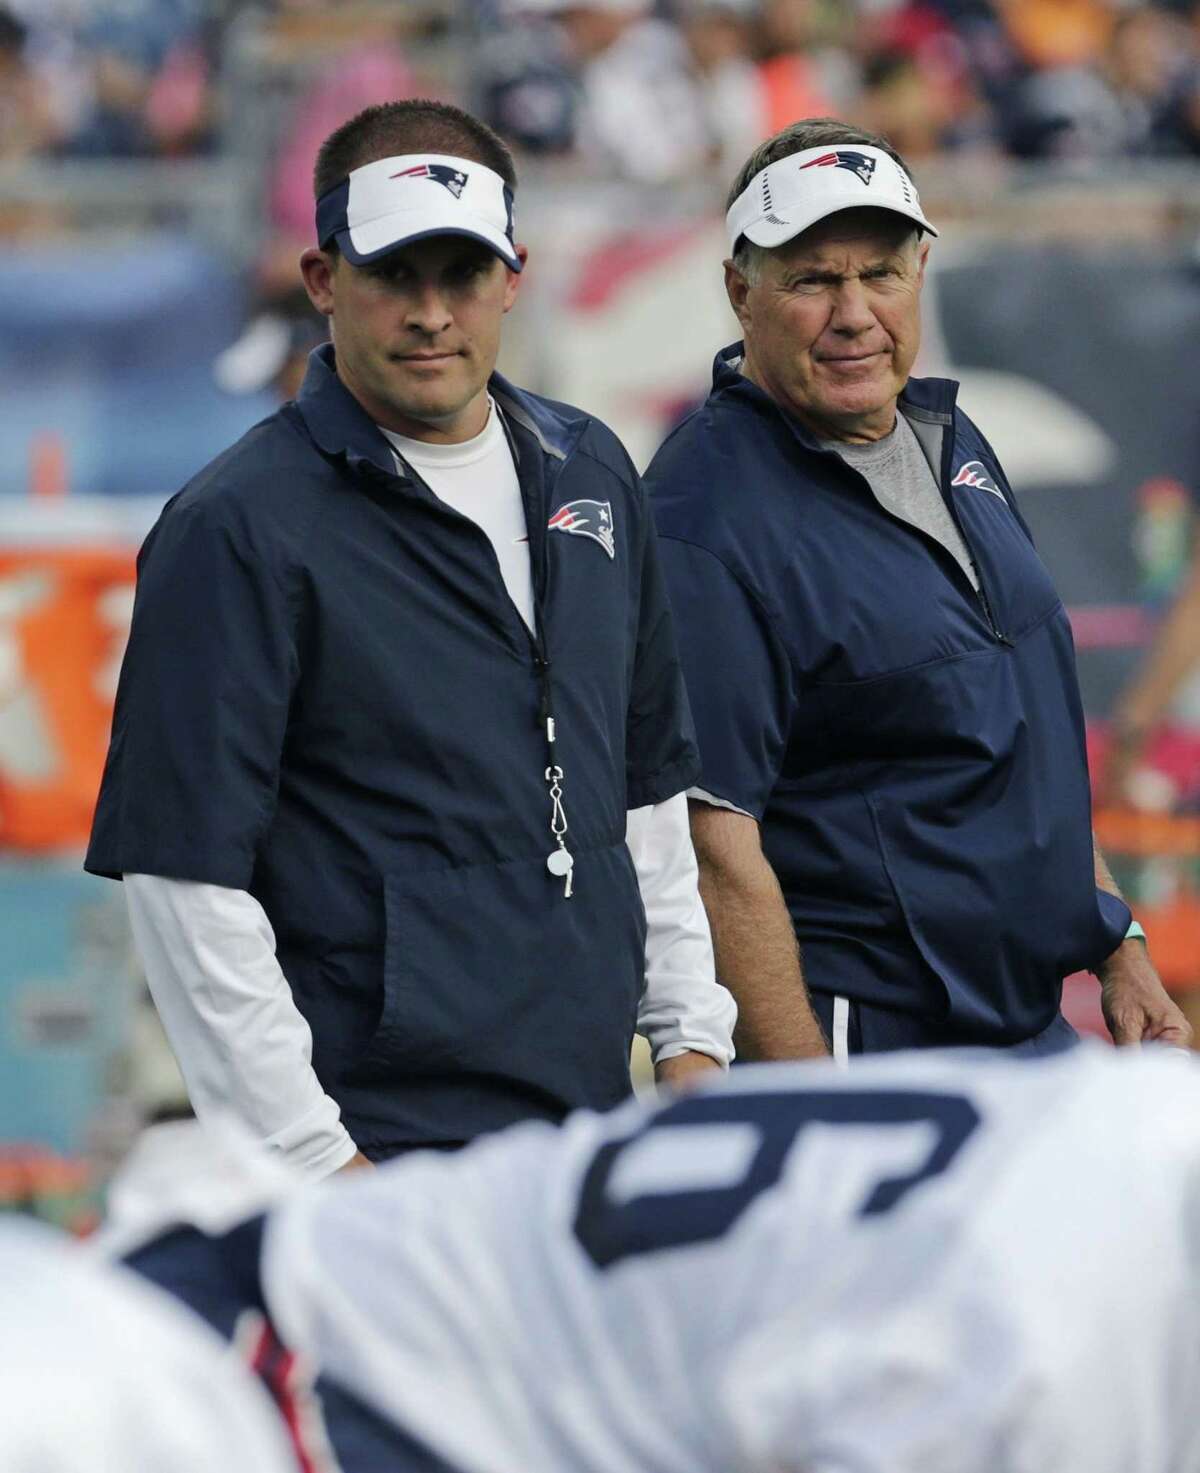 New England Patriots coach Bill Belichick, right, and offensive coordinator Josh McDaniels watch practice on Wednesday in Foxborough, Mass.